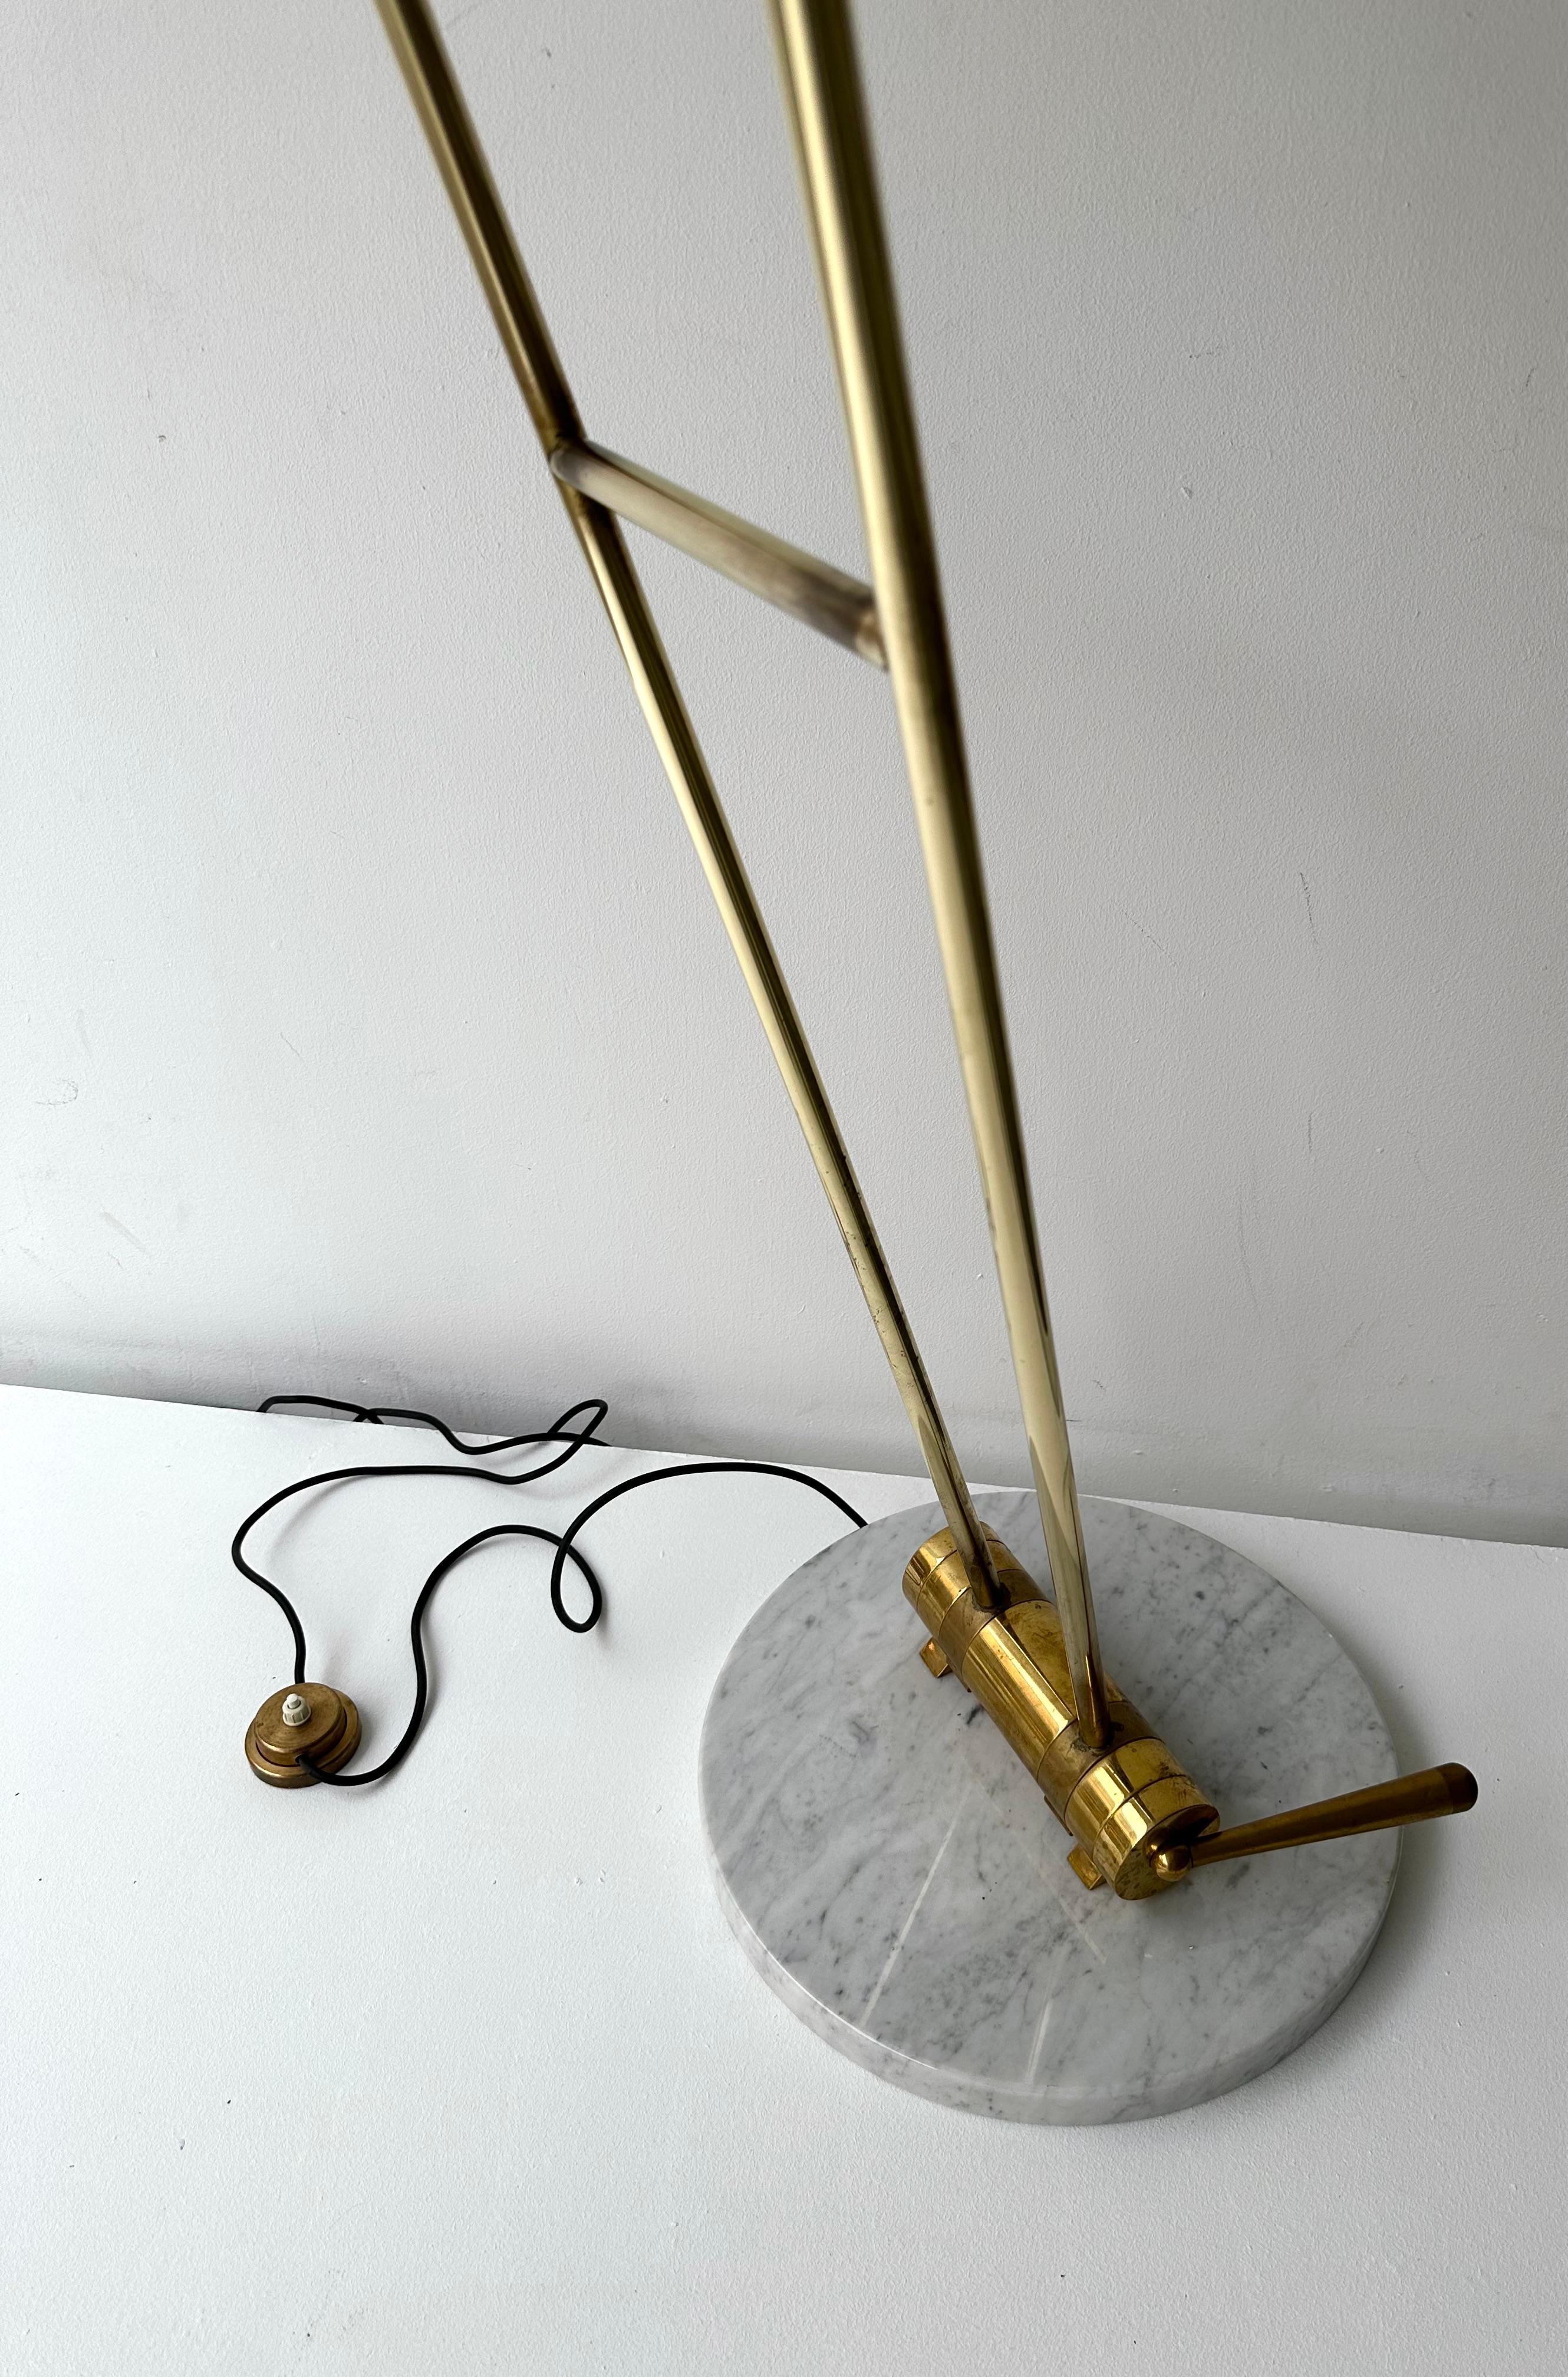 Very rare Mid-Century Modern floor or reading lamp in brass and white cream lacquered painted metal, white lucite methacrylate difusor. High quality articulated adjustable brass arm and handle, marble base by the Italian designer Angelo Lelii for